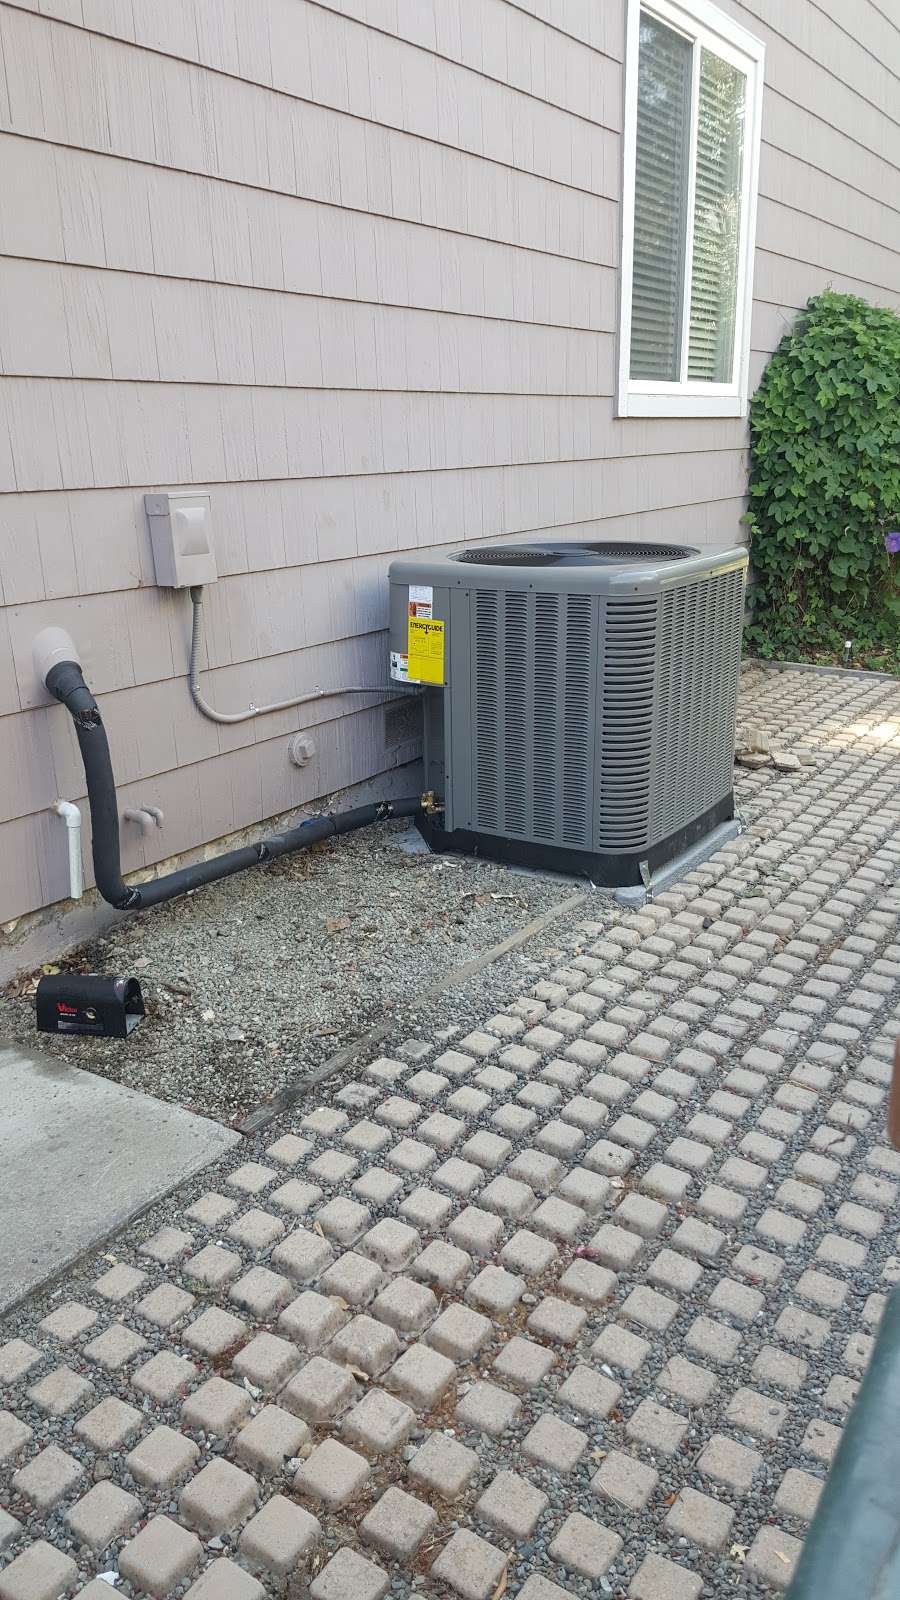 Care Heating & Air Conditioning Inc | 2822, 1482 74th Ave, Oakland, CA 94621 | Phone: (510) 798-7944